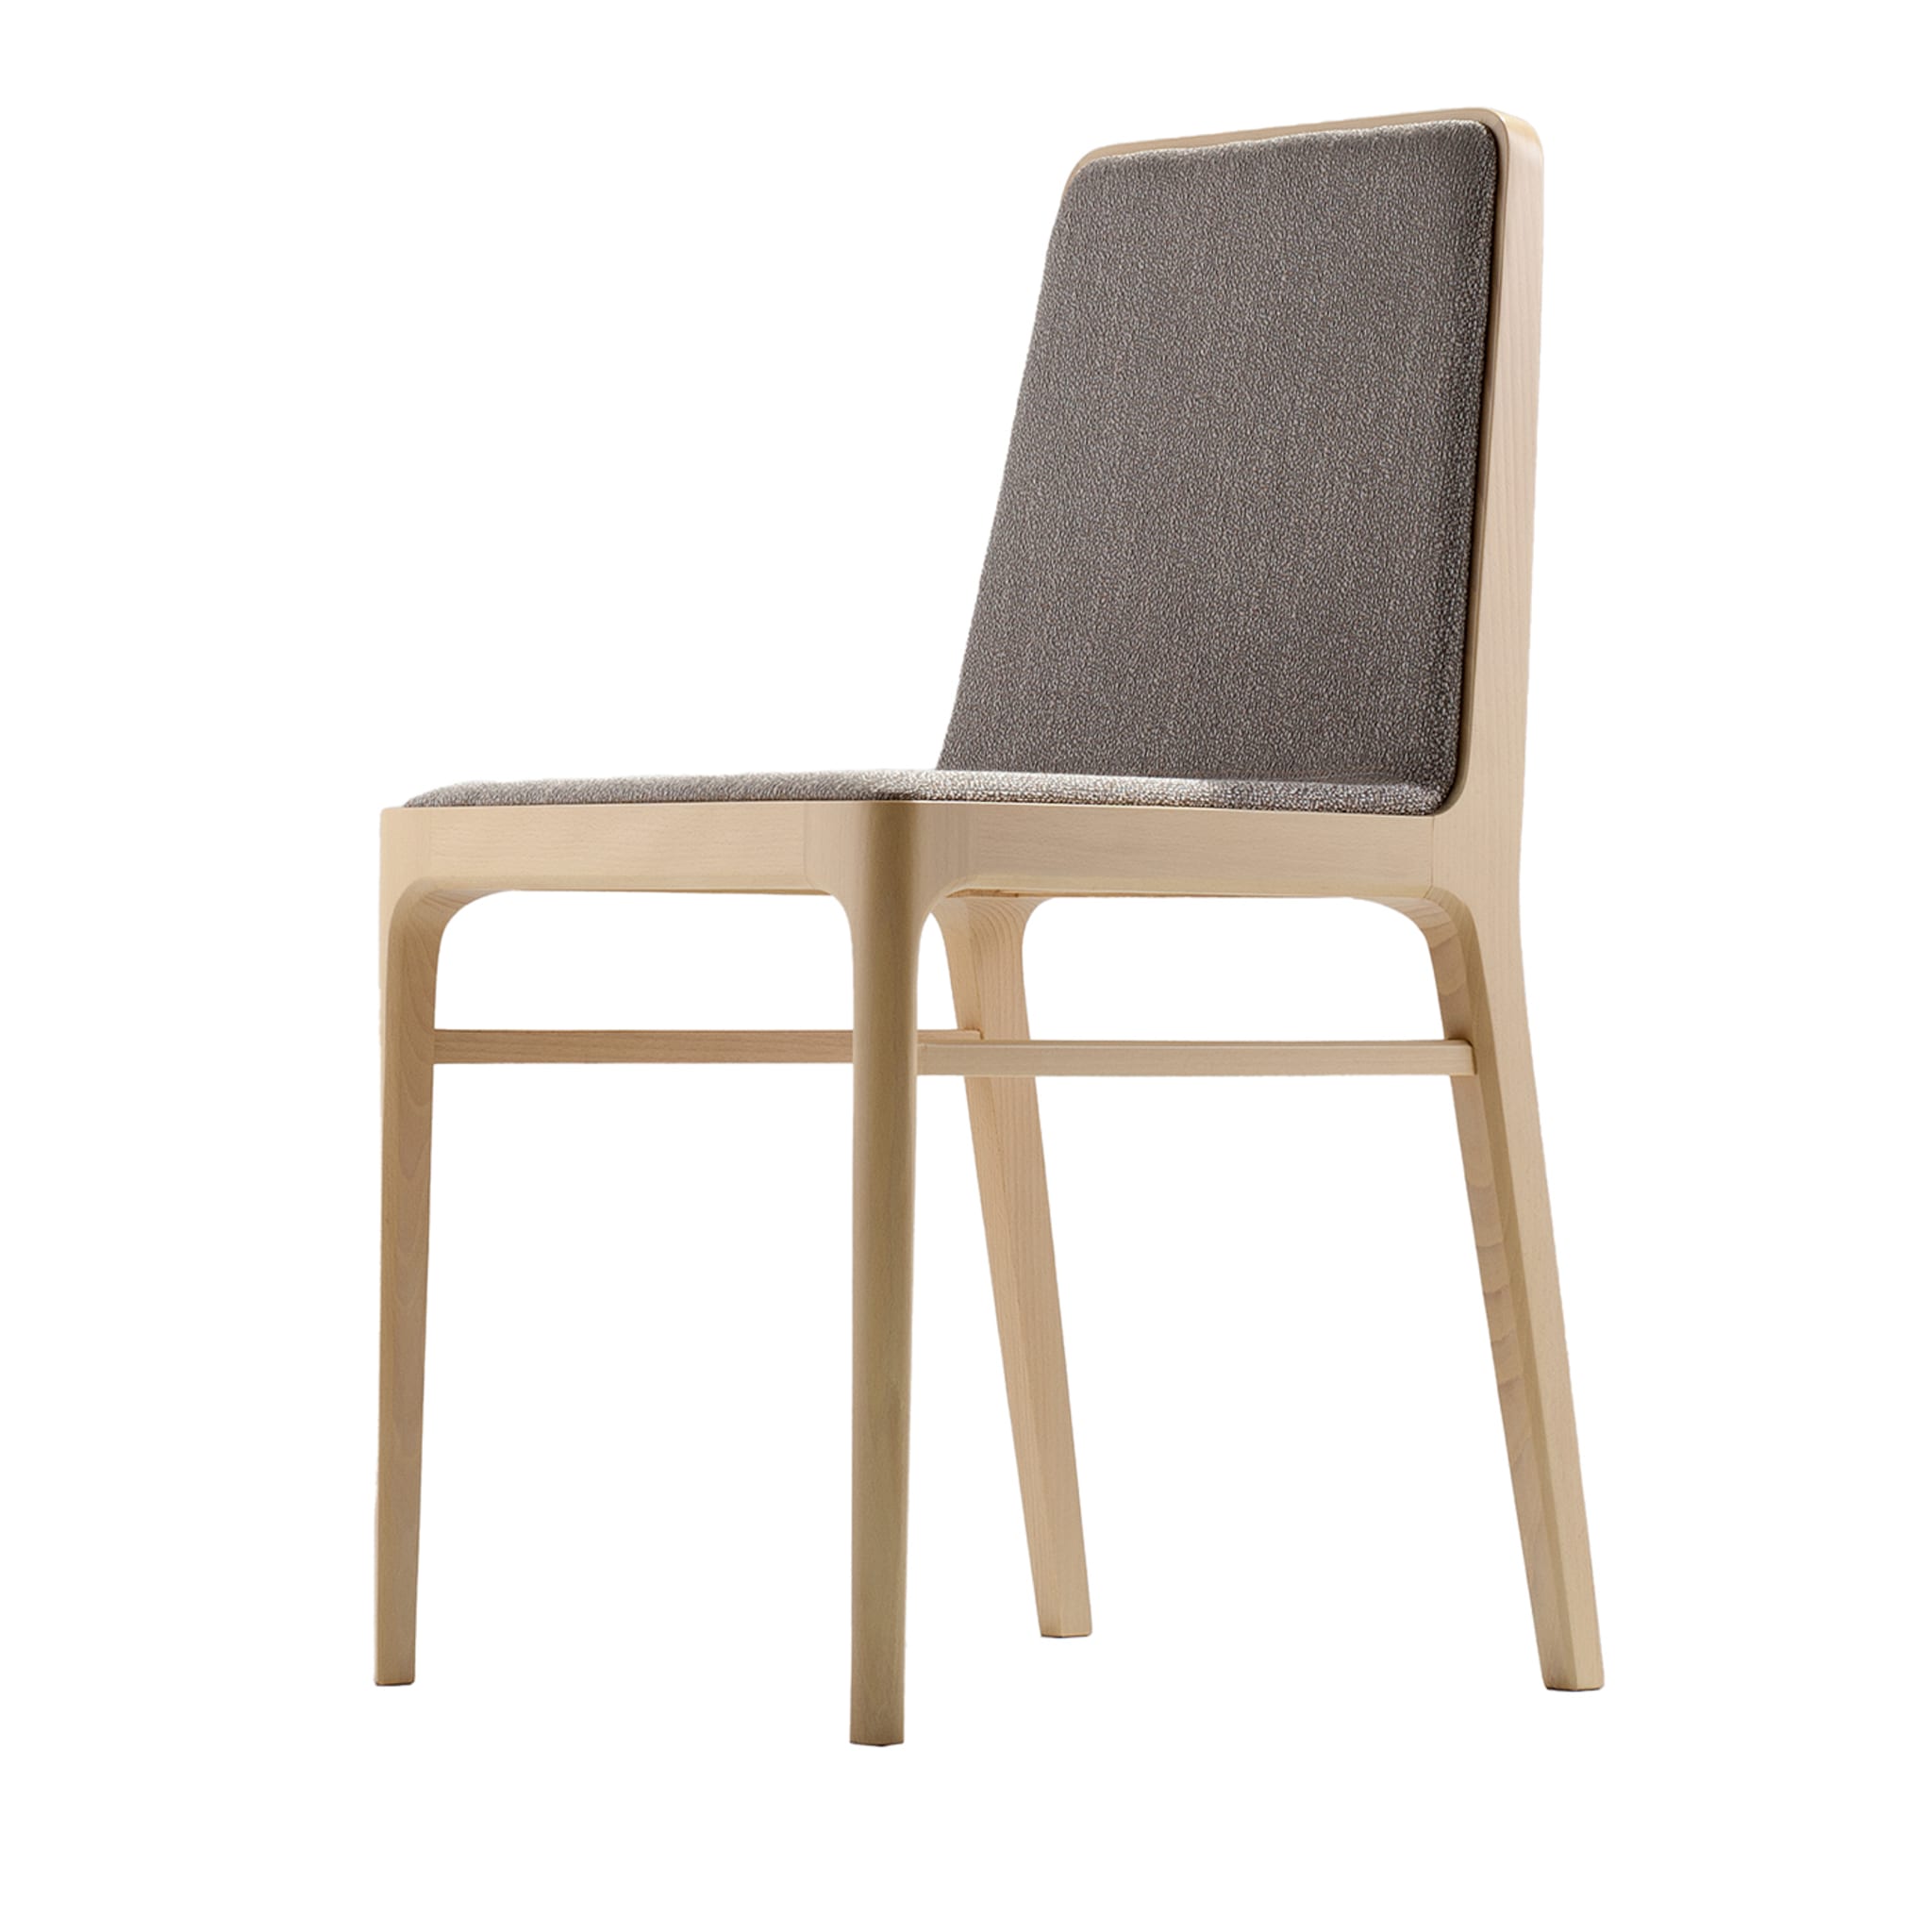 Tip Tap 380 Gray Chair by Claudio Perin - Main view